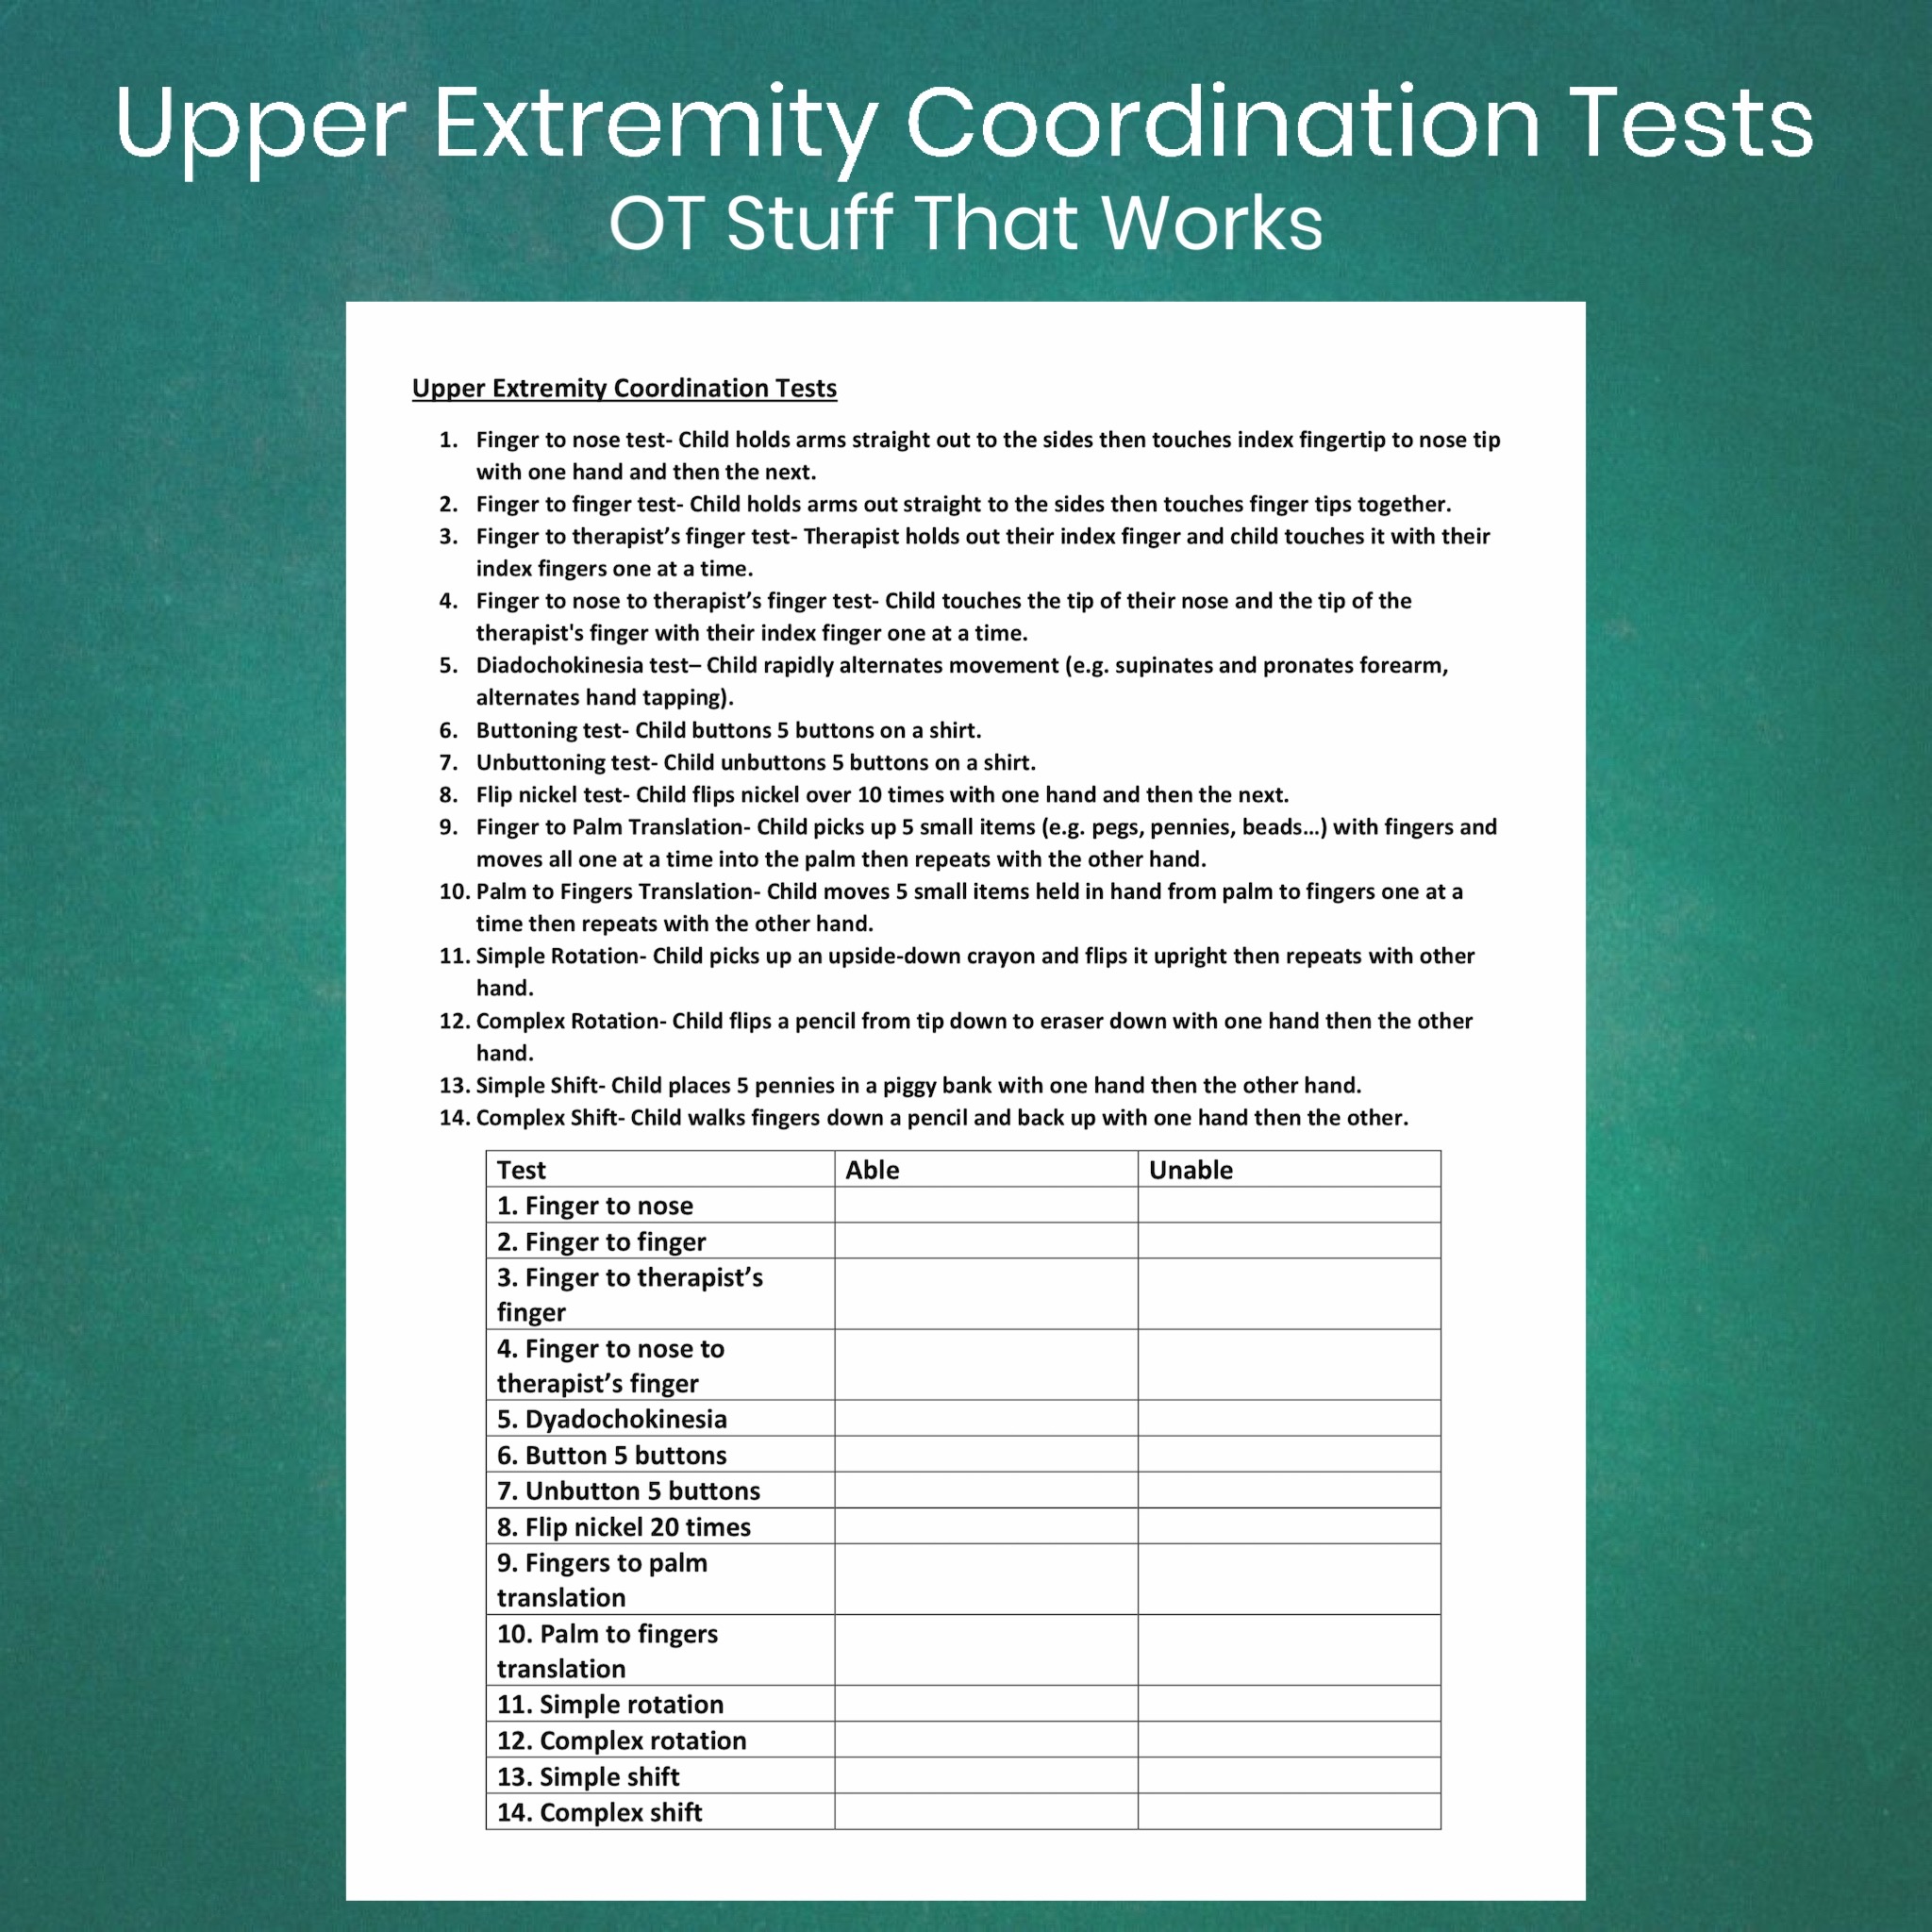 Uppper Extremity Coordination Tests